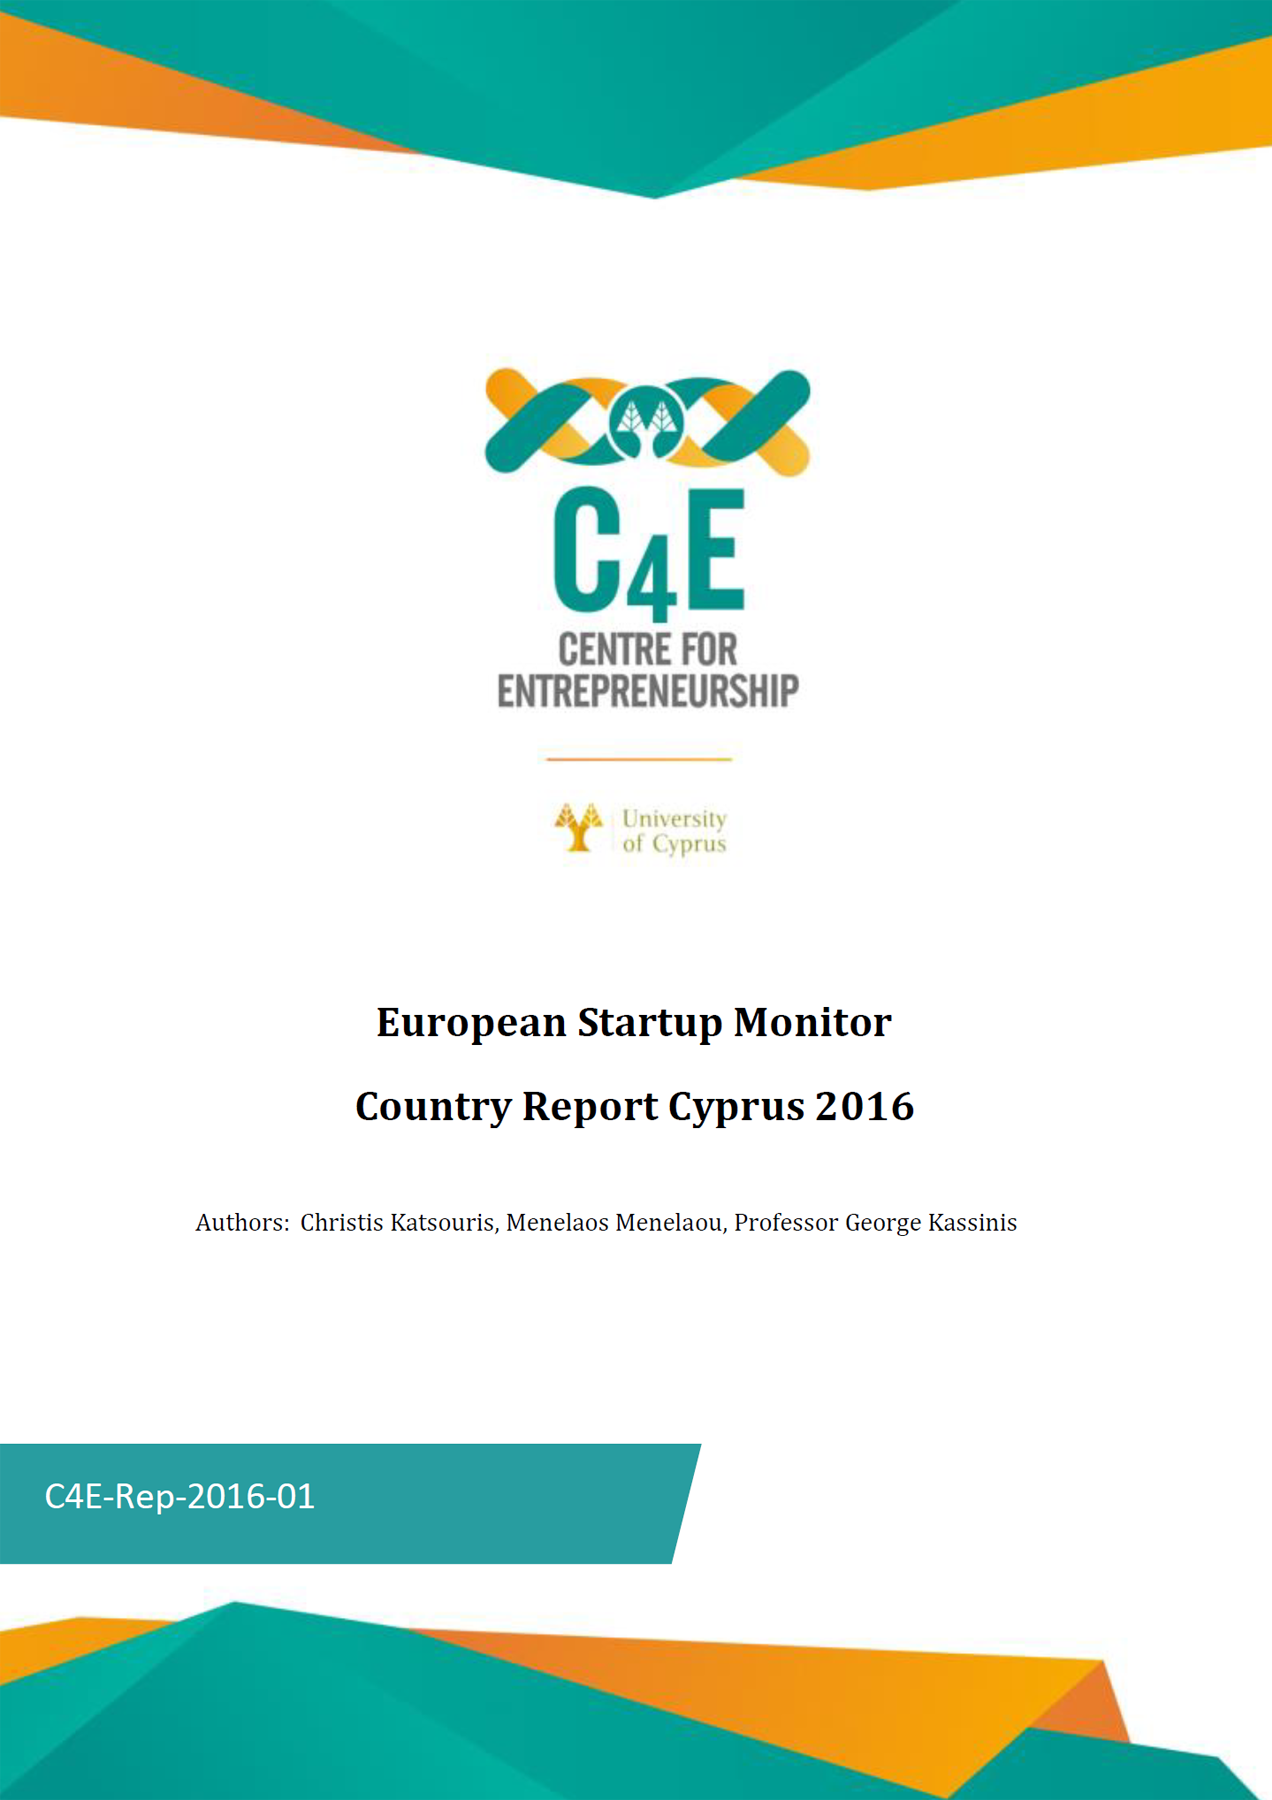 European Startup Monitor - Country Report Cyprus 2016